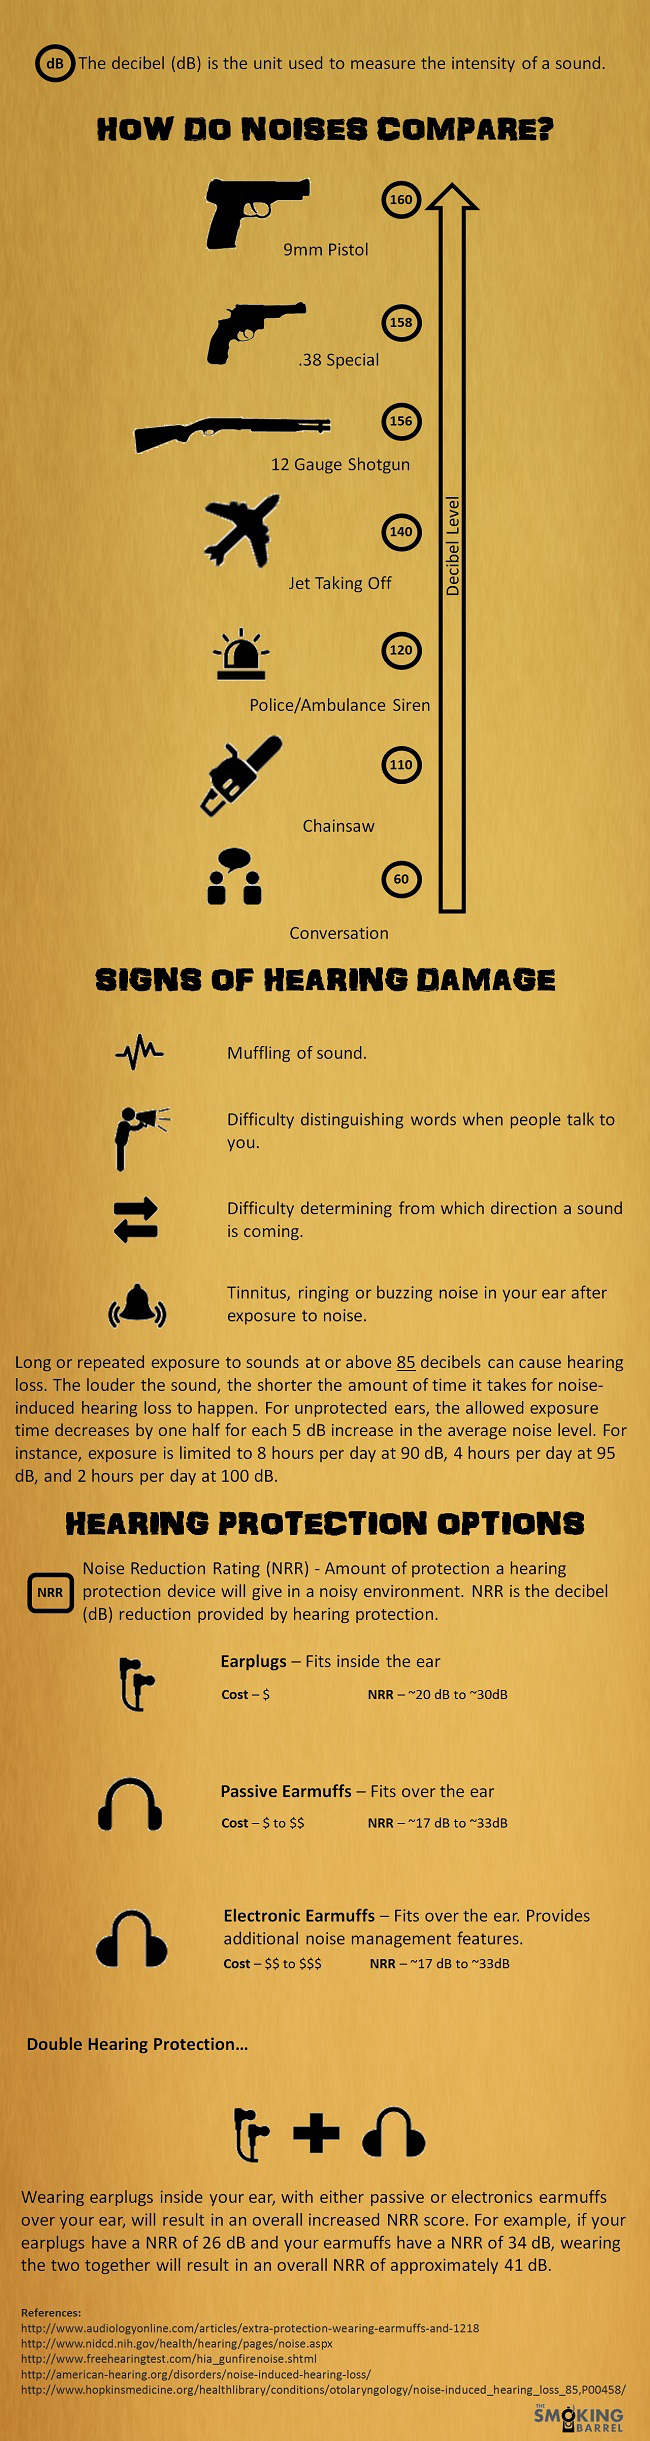 how shooting affects hearing